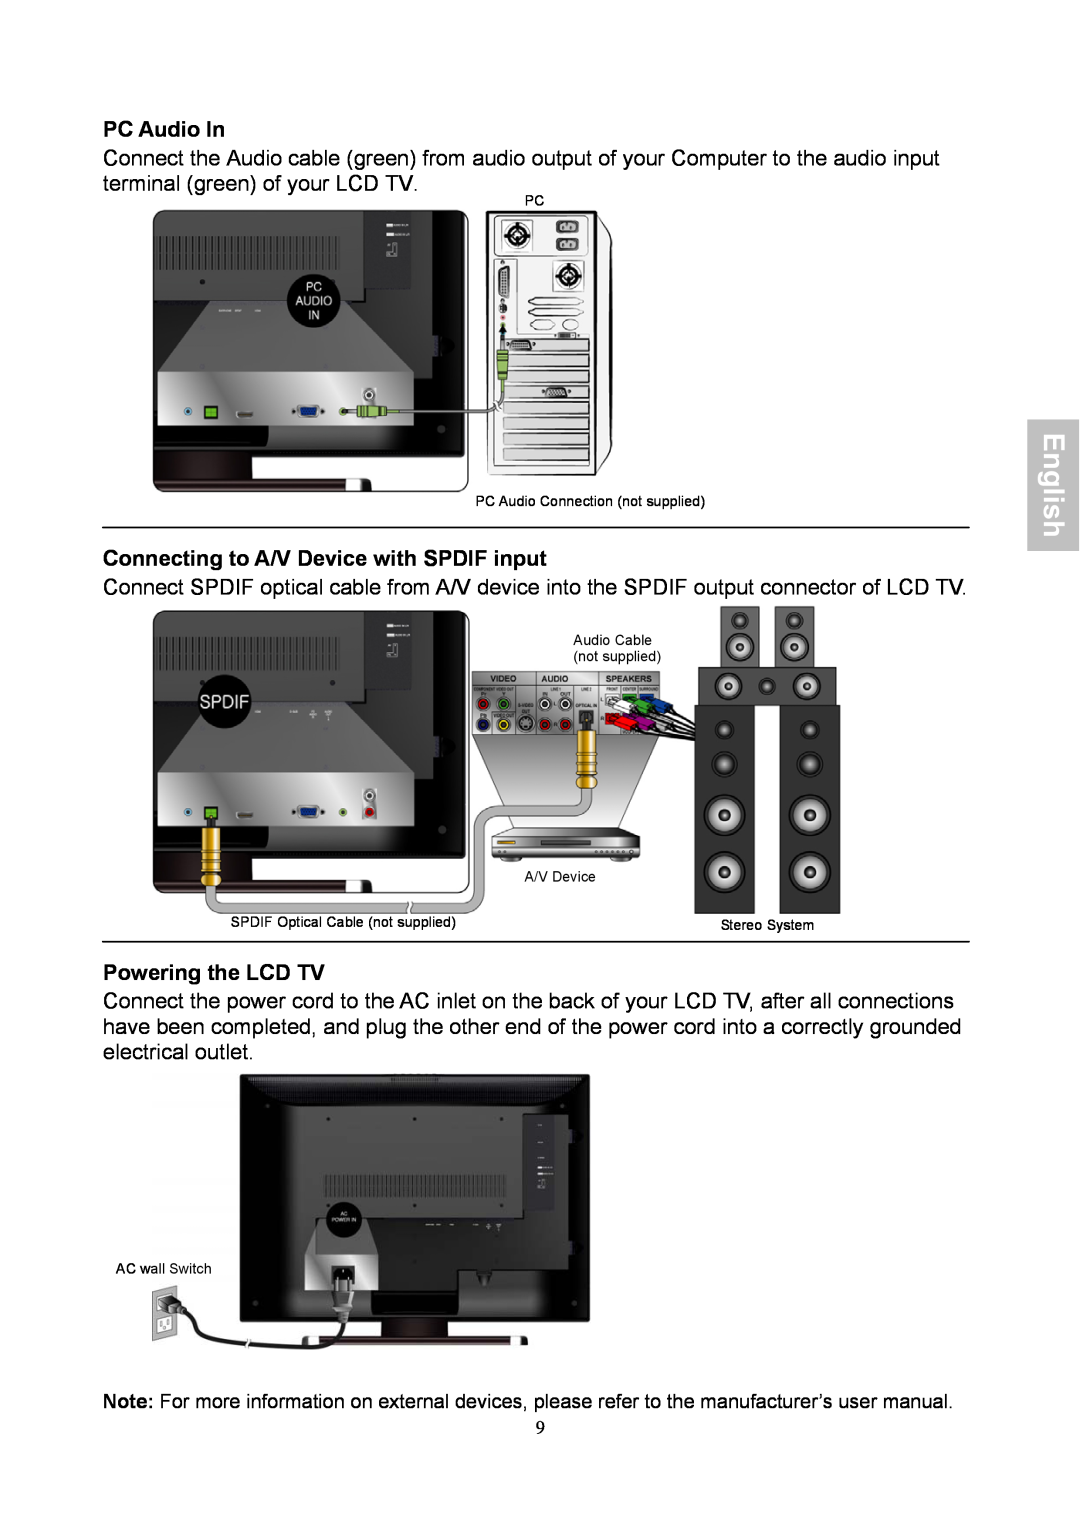 HANNspree XV Series 32 PC Audio In, Connecting to A/V Device with SPDIF input, Powering the LCD TV, English, Stereo System 